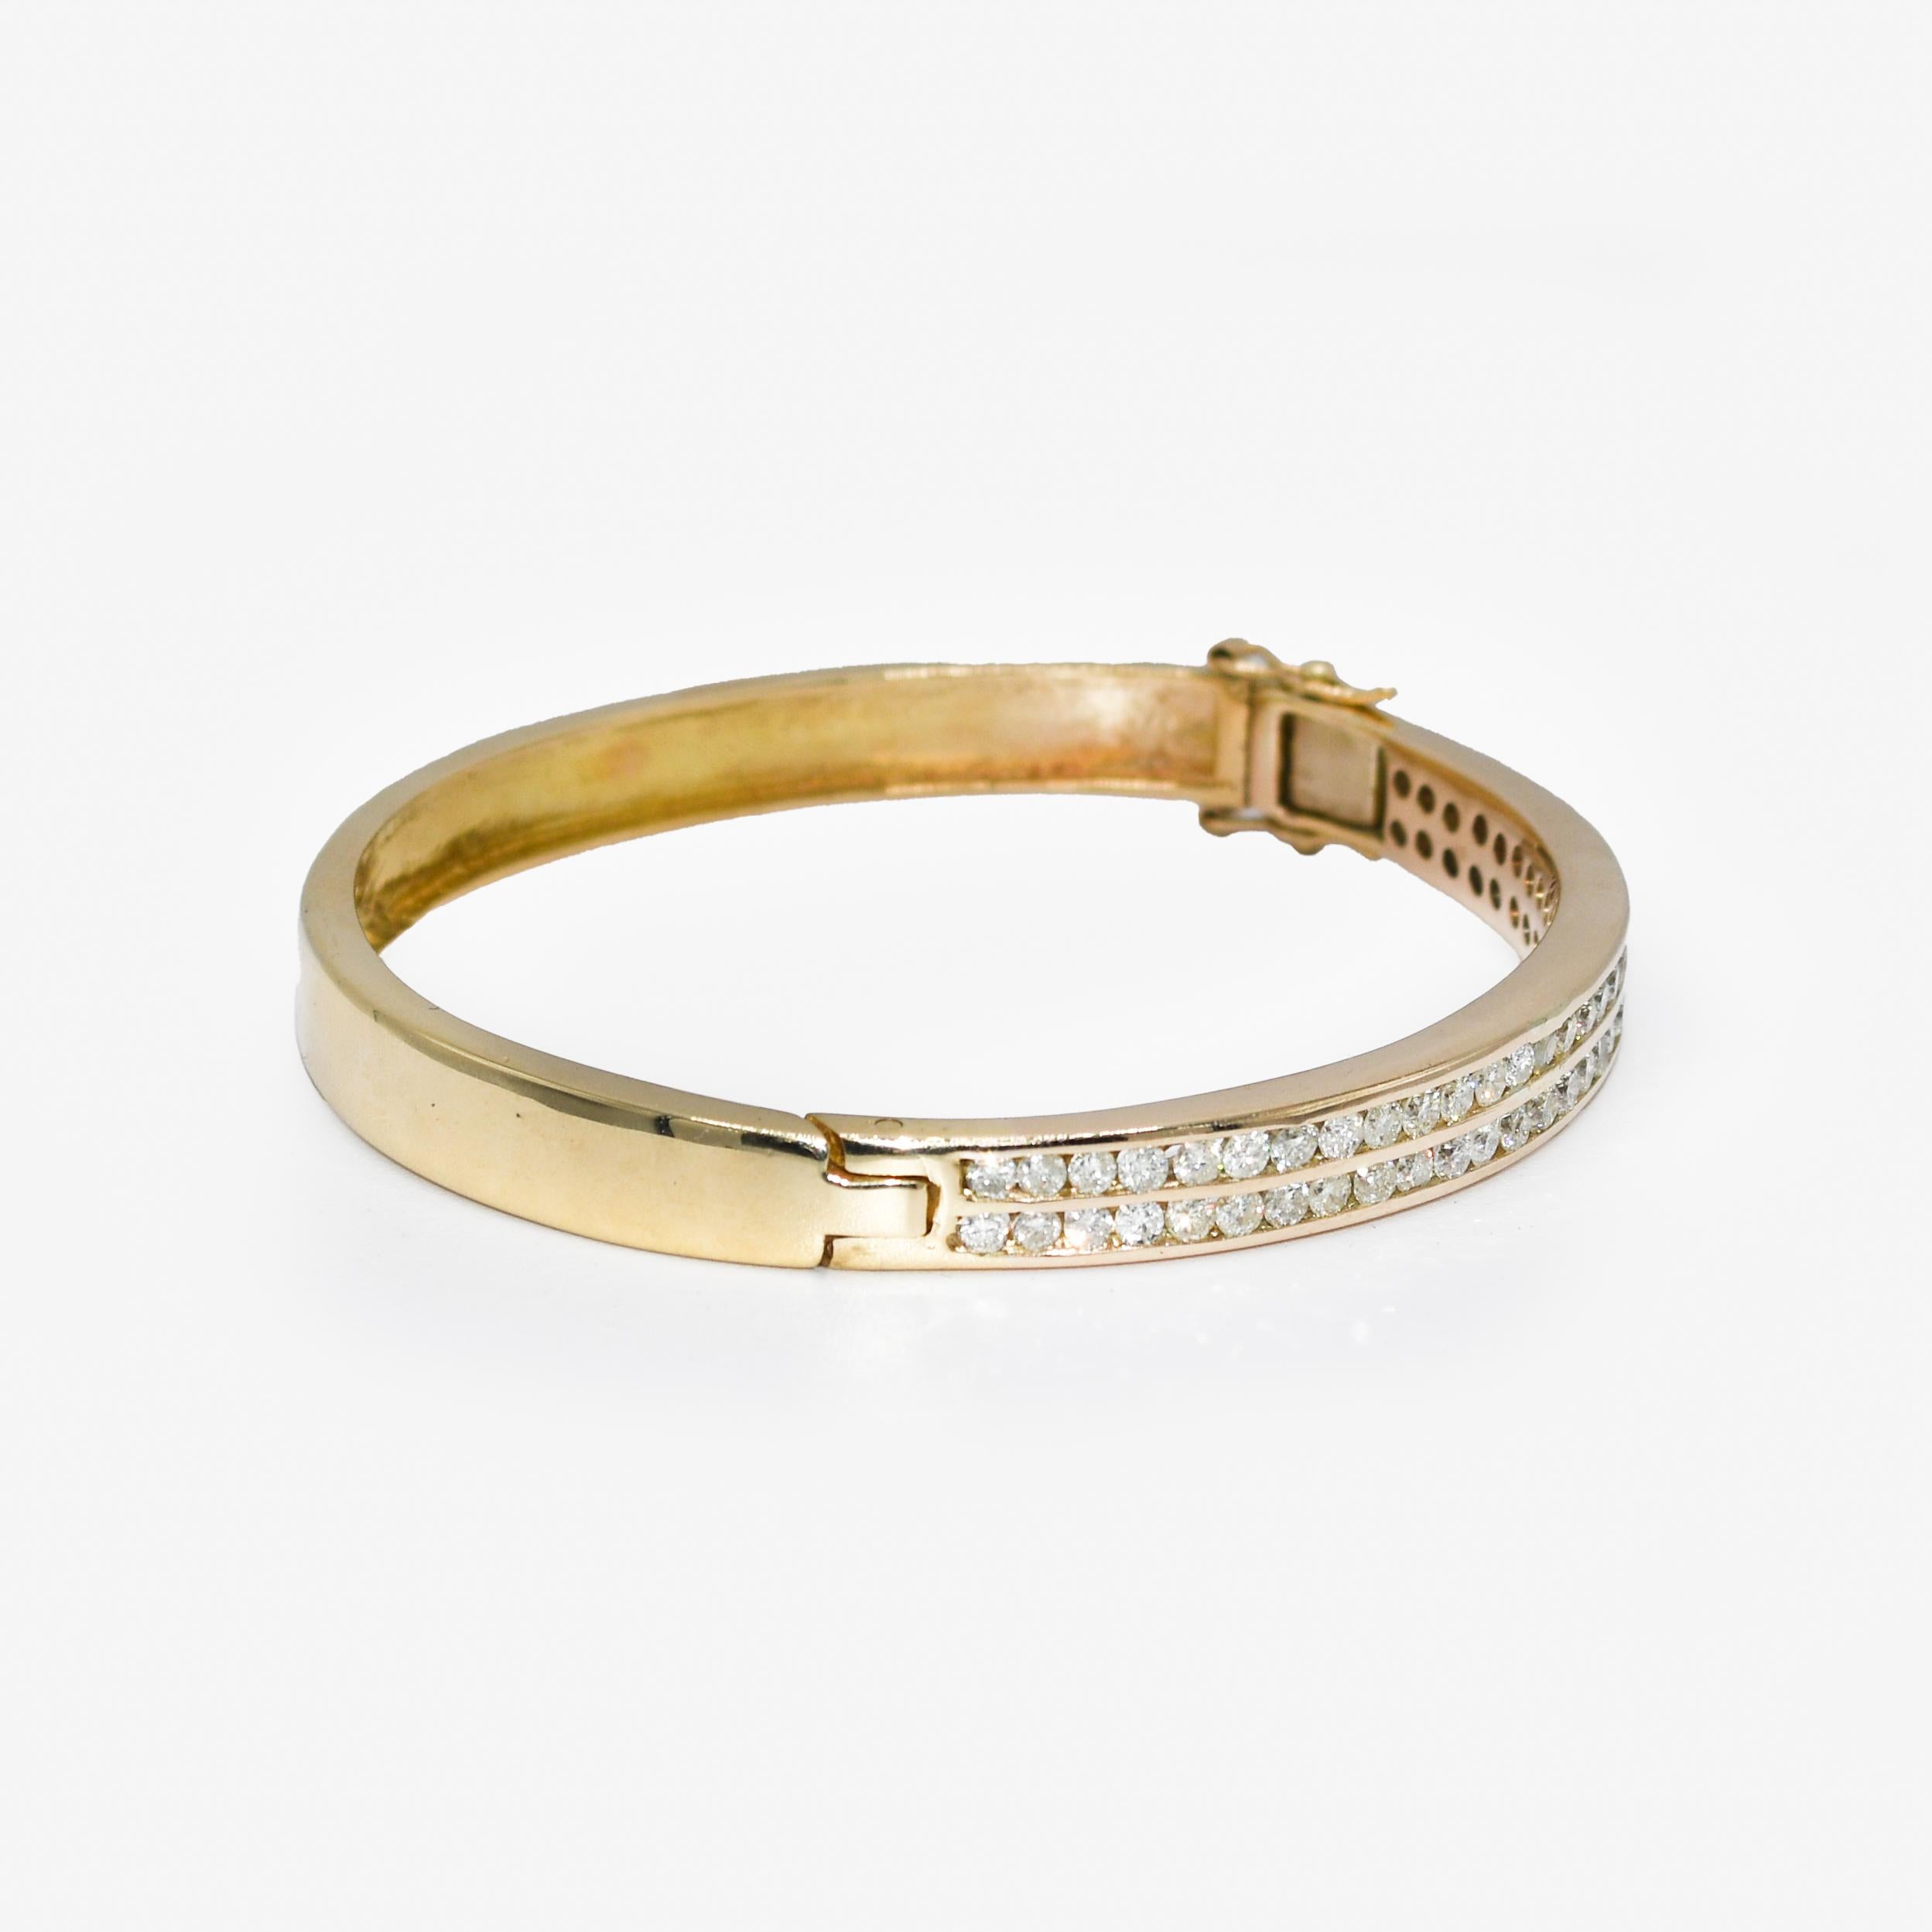 Ladies diamond bangle bracelet with 14k yellow gold setting.
Tests 14k with electronic tester and weighs 34.8 grams.
The diamonds are round brilliant cuts, approximately 2.50 total carats, i, j, k color range, Si to i1 clarity.
The bangle measures